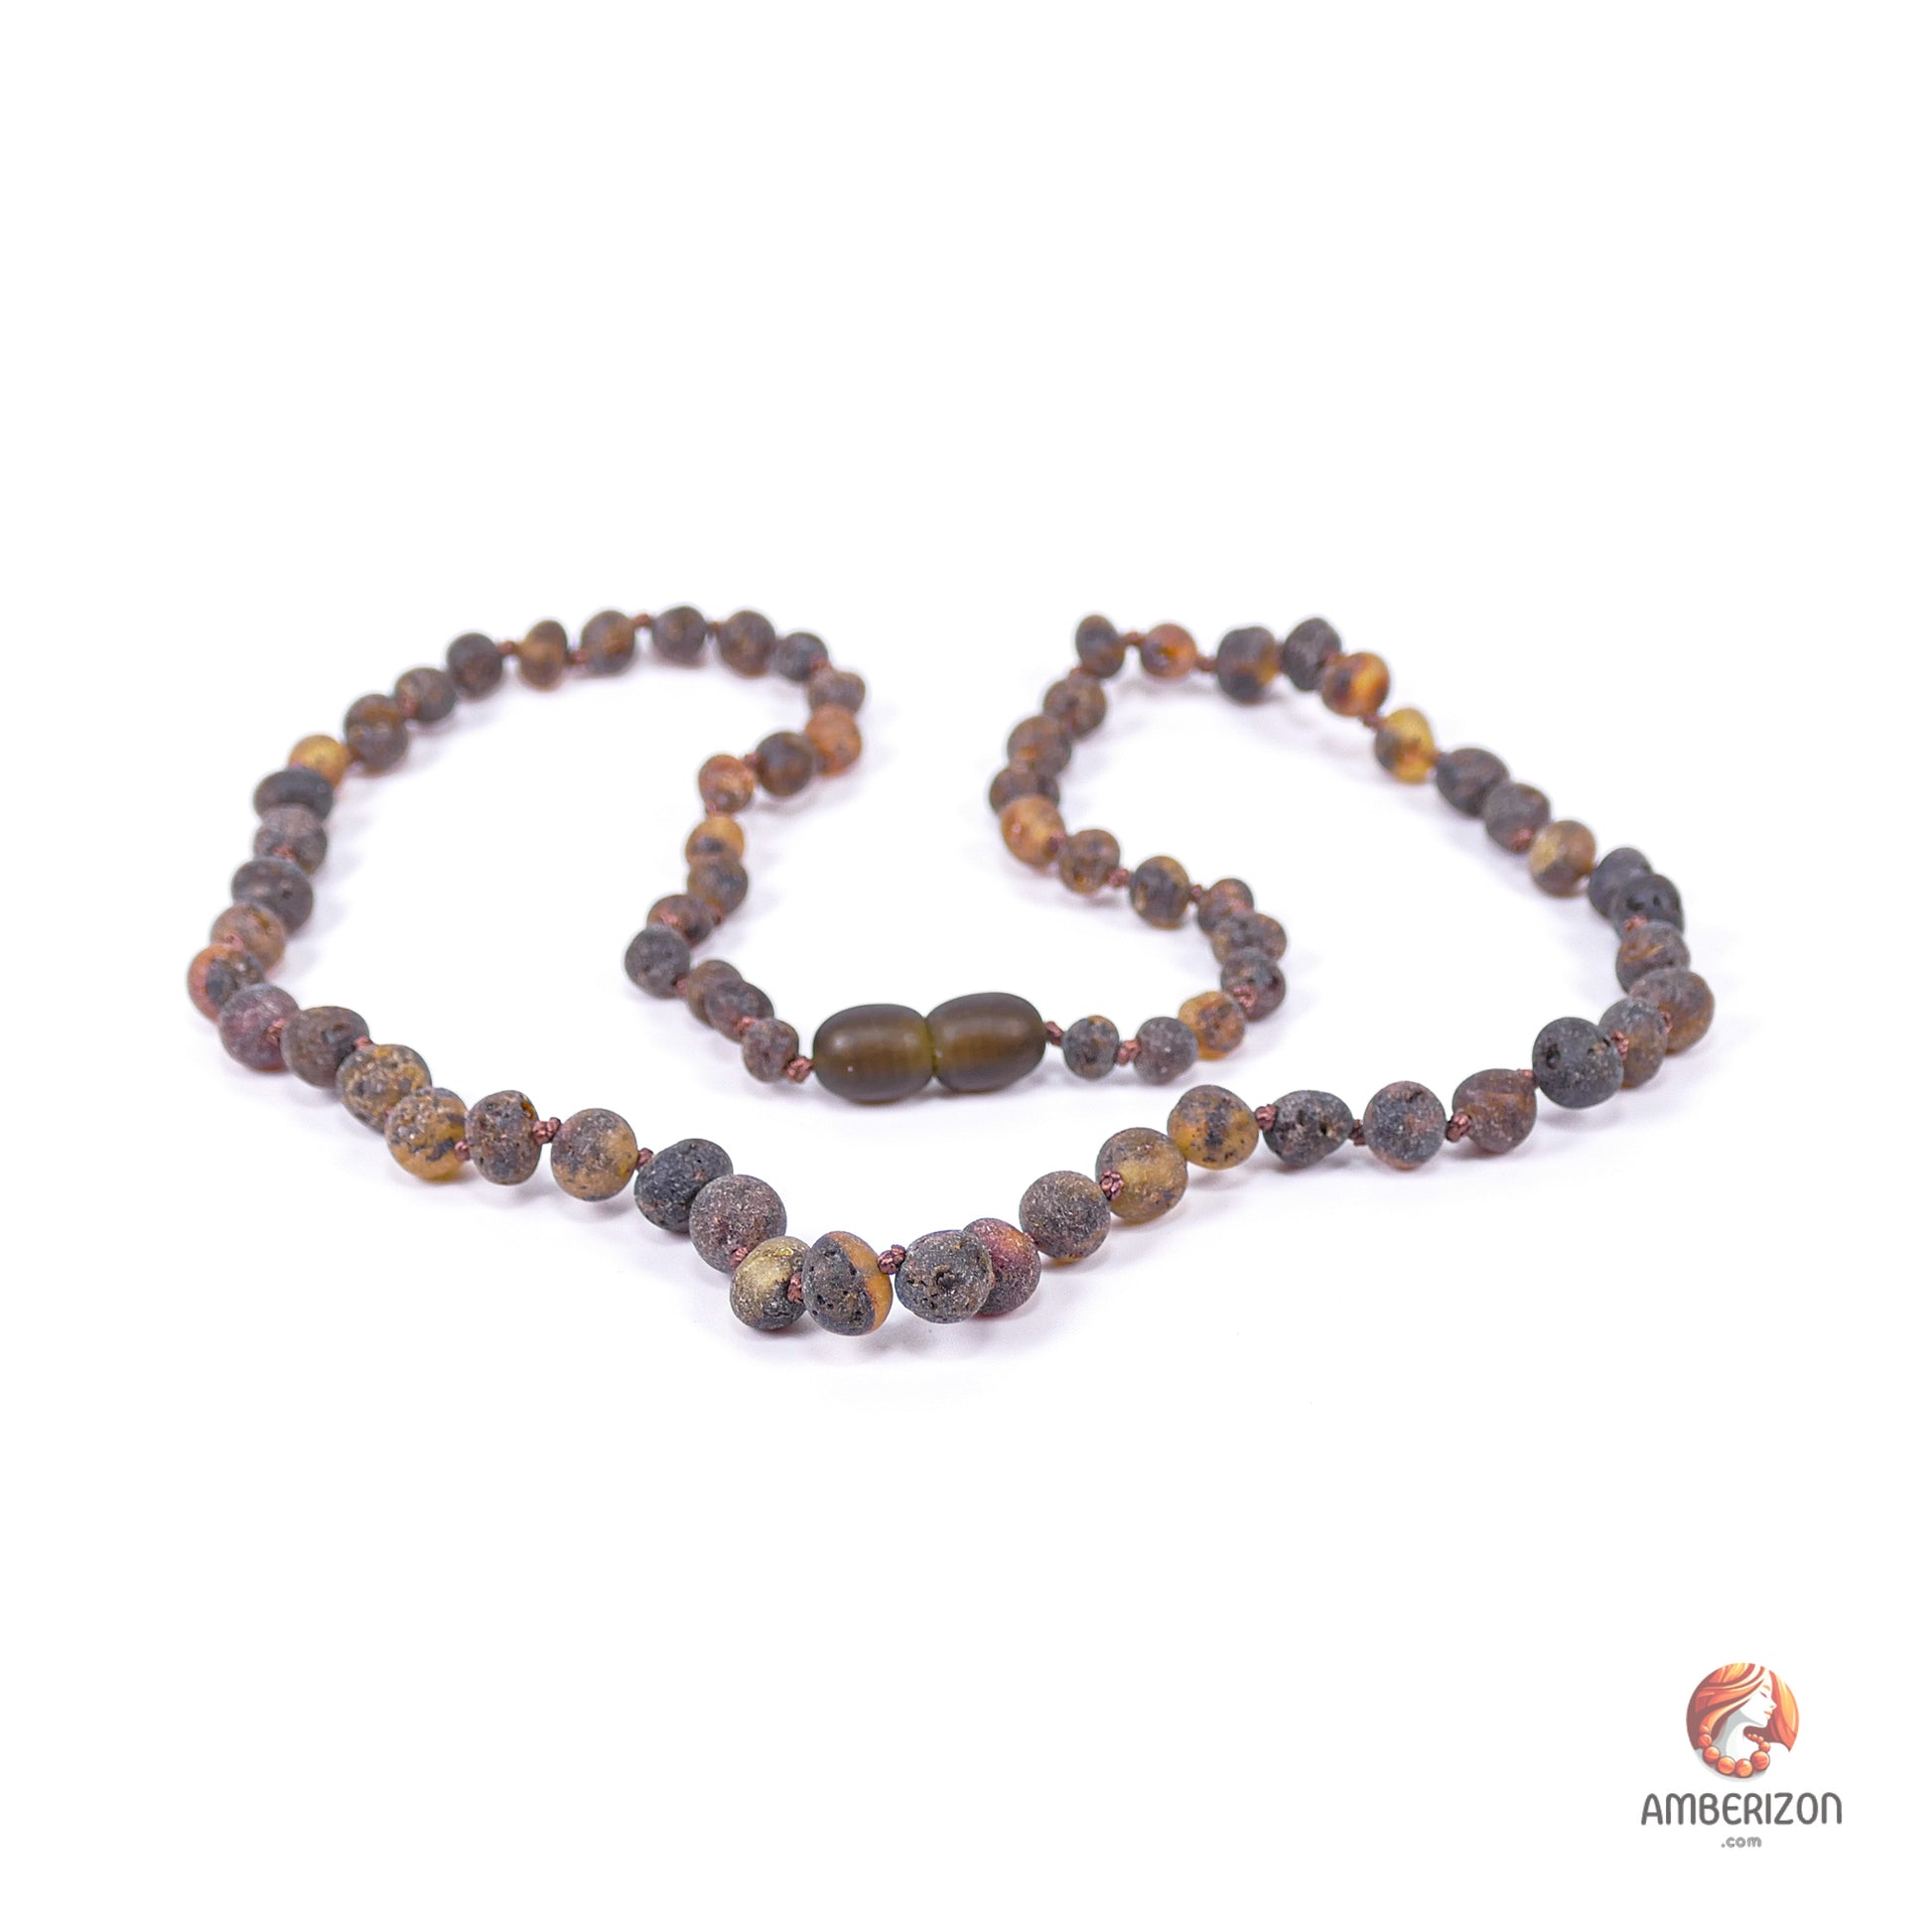 Gray raw amber teething necklace for mom - Adult Baltic amber necklace